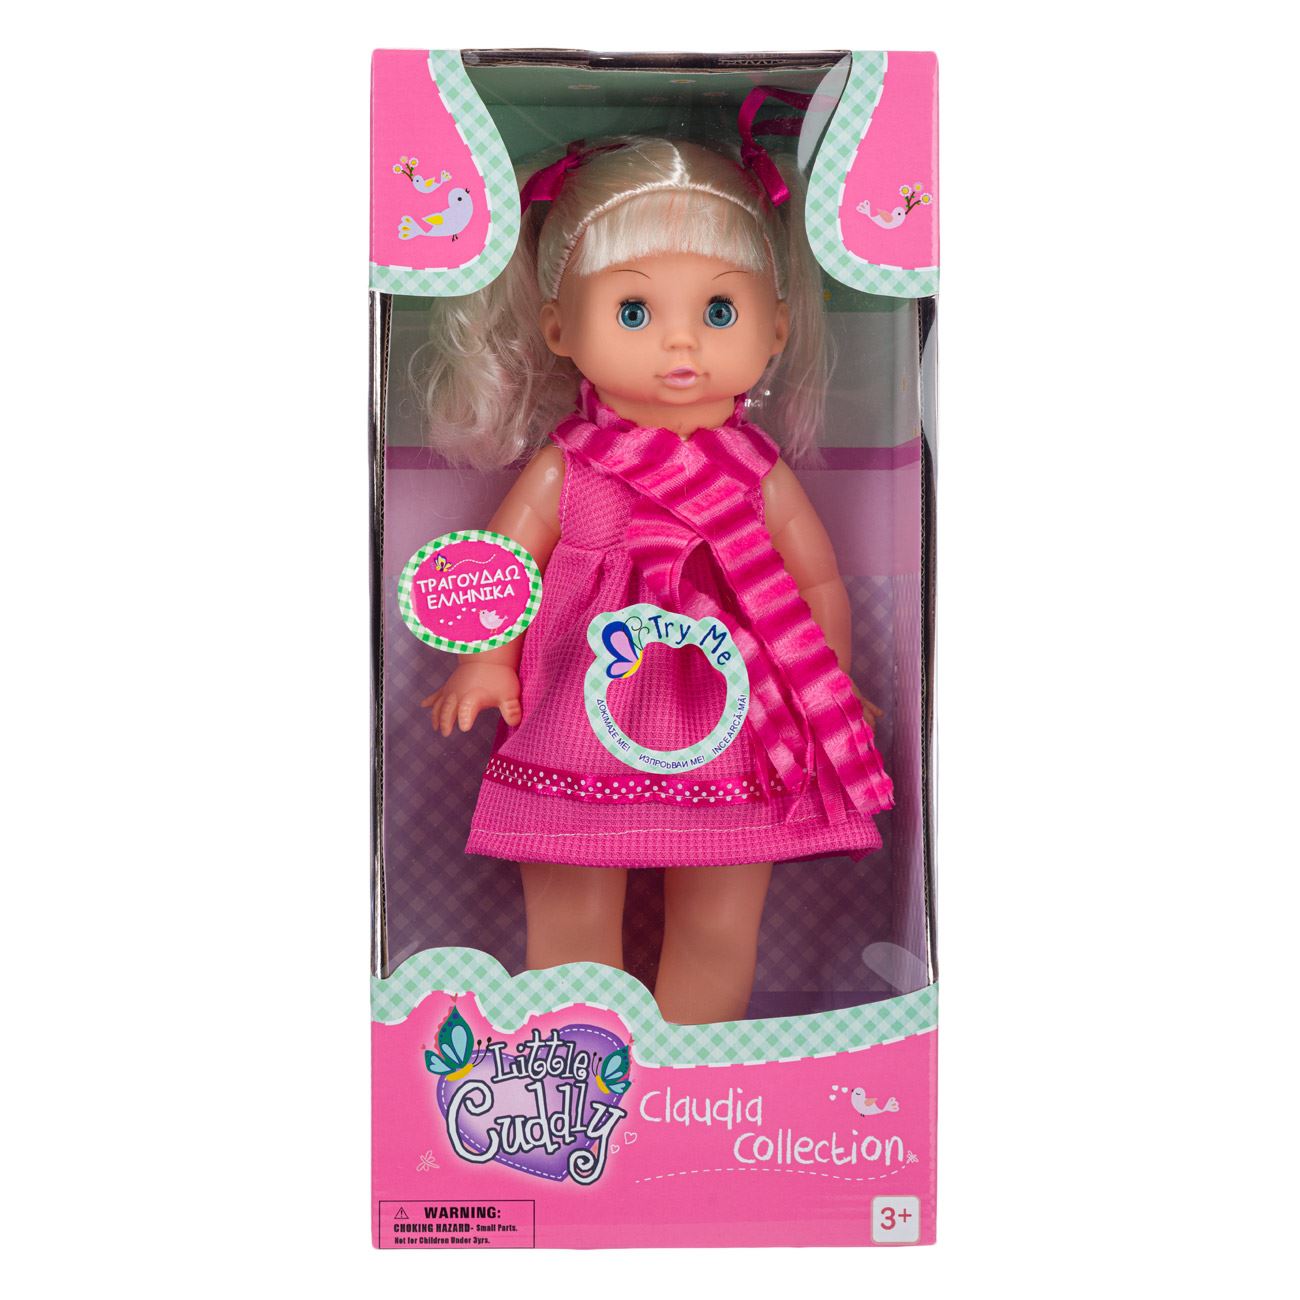 Little Cuddly Claudia Collection 10 Plastic Baby Doll Pink ドール